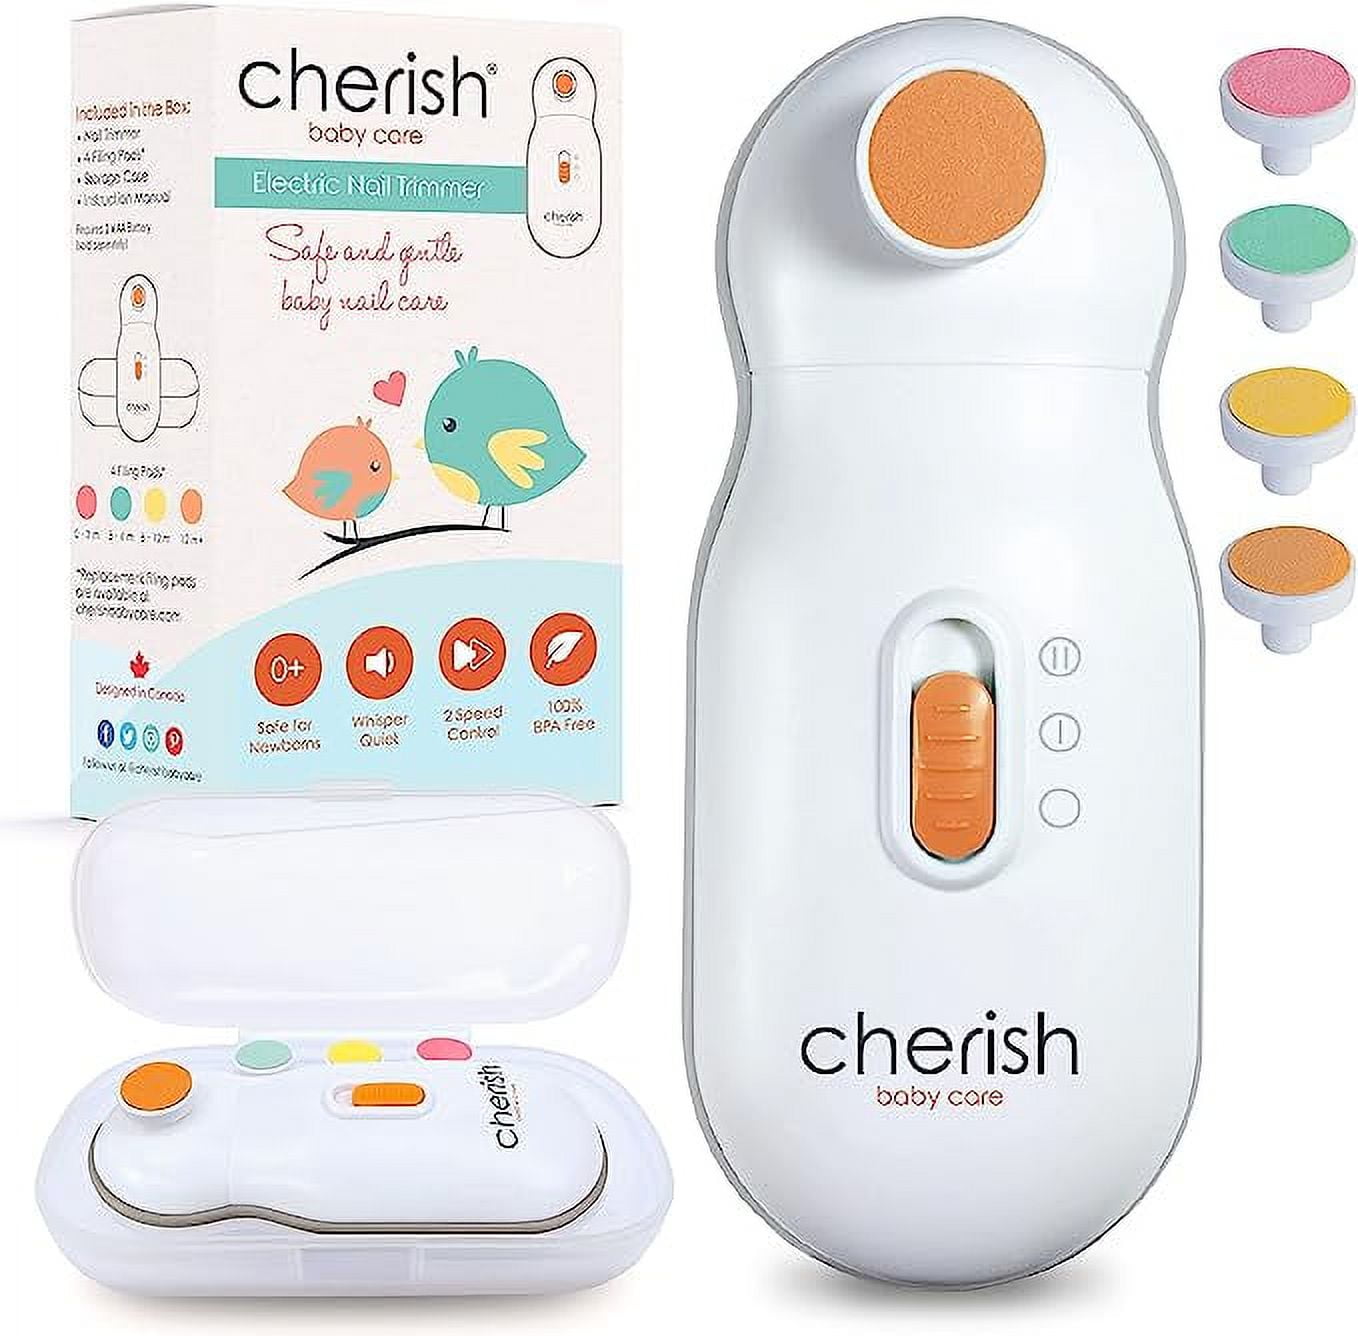 Cherish Baby Care Baby Nail File Electric Nail Trimmer Baby Nail Trimmer for Infant and Toddler Baby Grooming Kit 4048031d ff7b 4e11 802b da4989829e6e.5a1ec108b416e62a441374aee38e482a